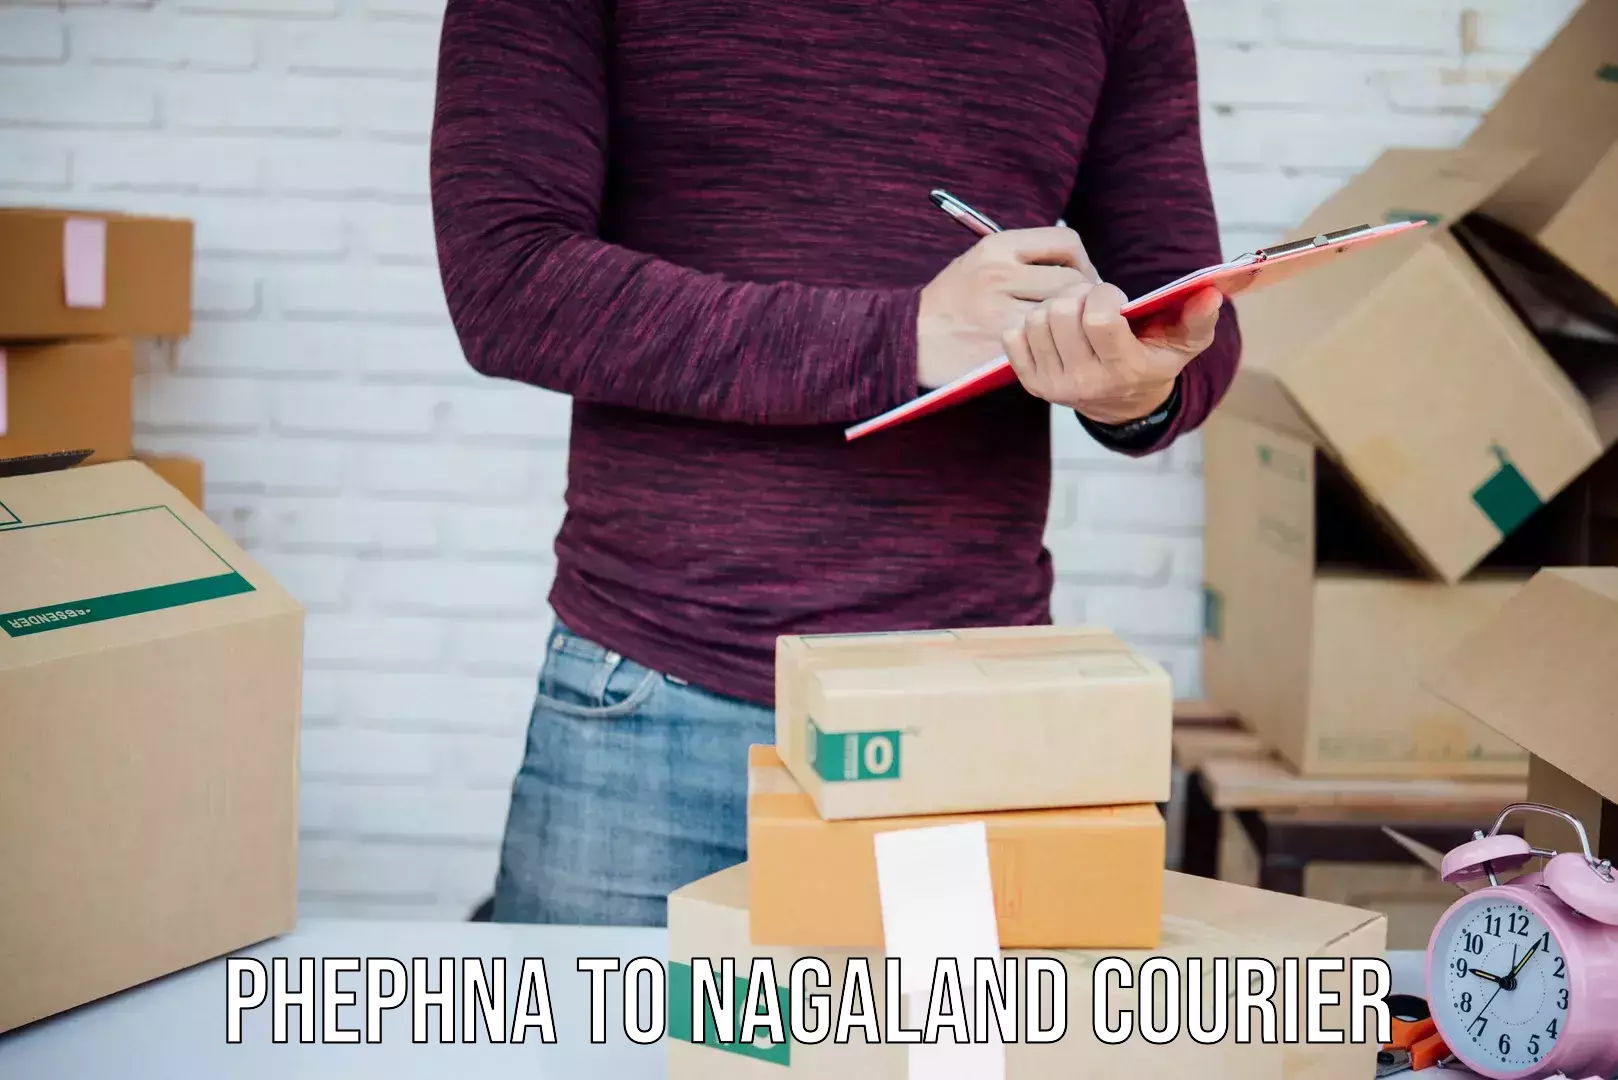 On-demand courier Phephna to Nagaland